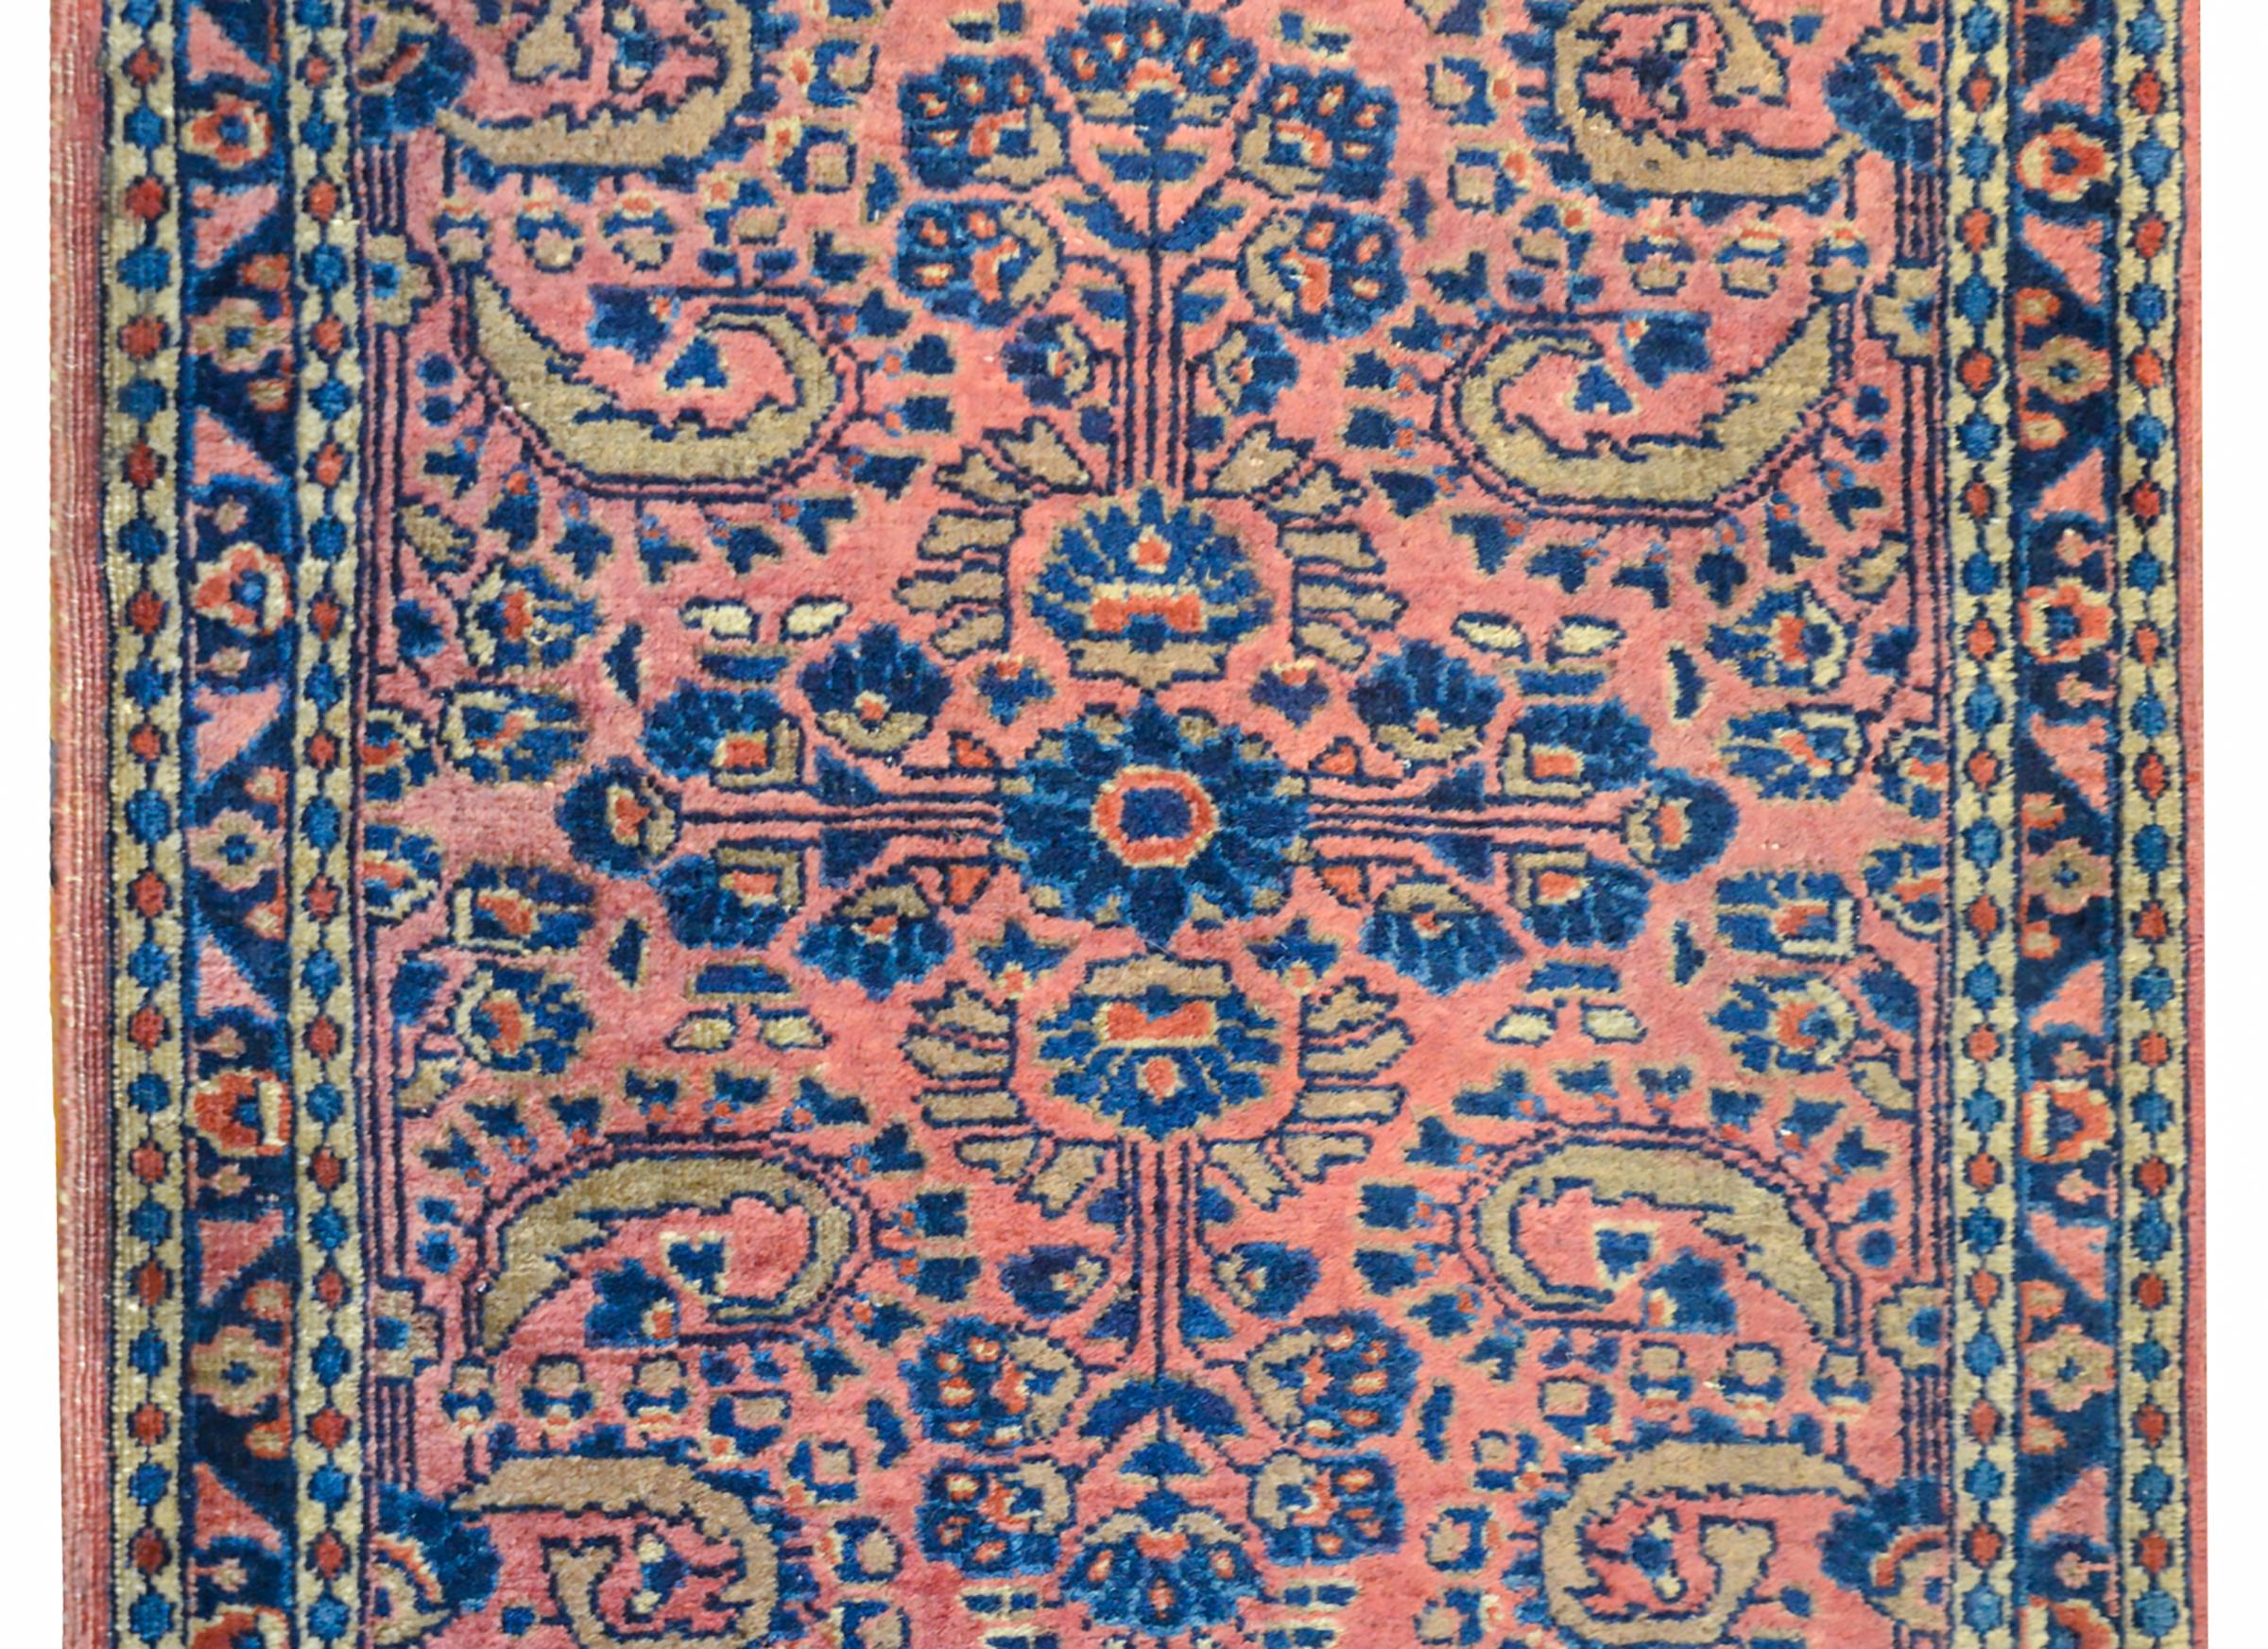 A wonderful early 20th century Persian petite Sarouk rug with a beautiful floral and scrolling vine pattern woven in light and dark indigo, gold, and coral on a pale coral background. The border is composed of a central floral patterned stripe